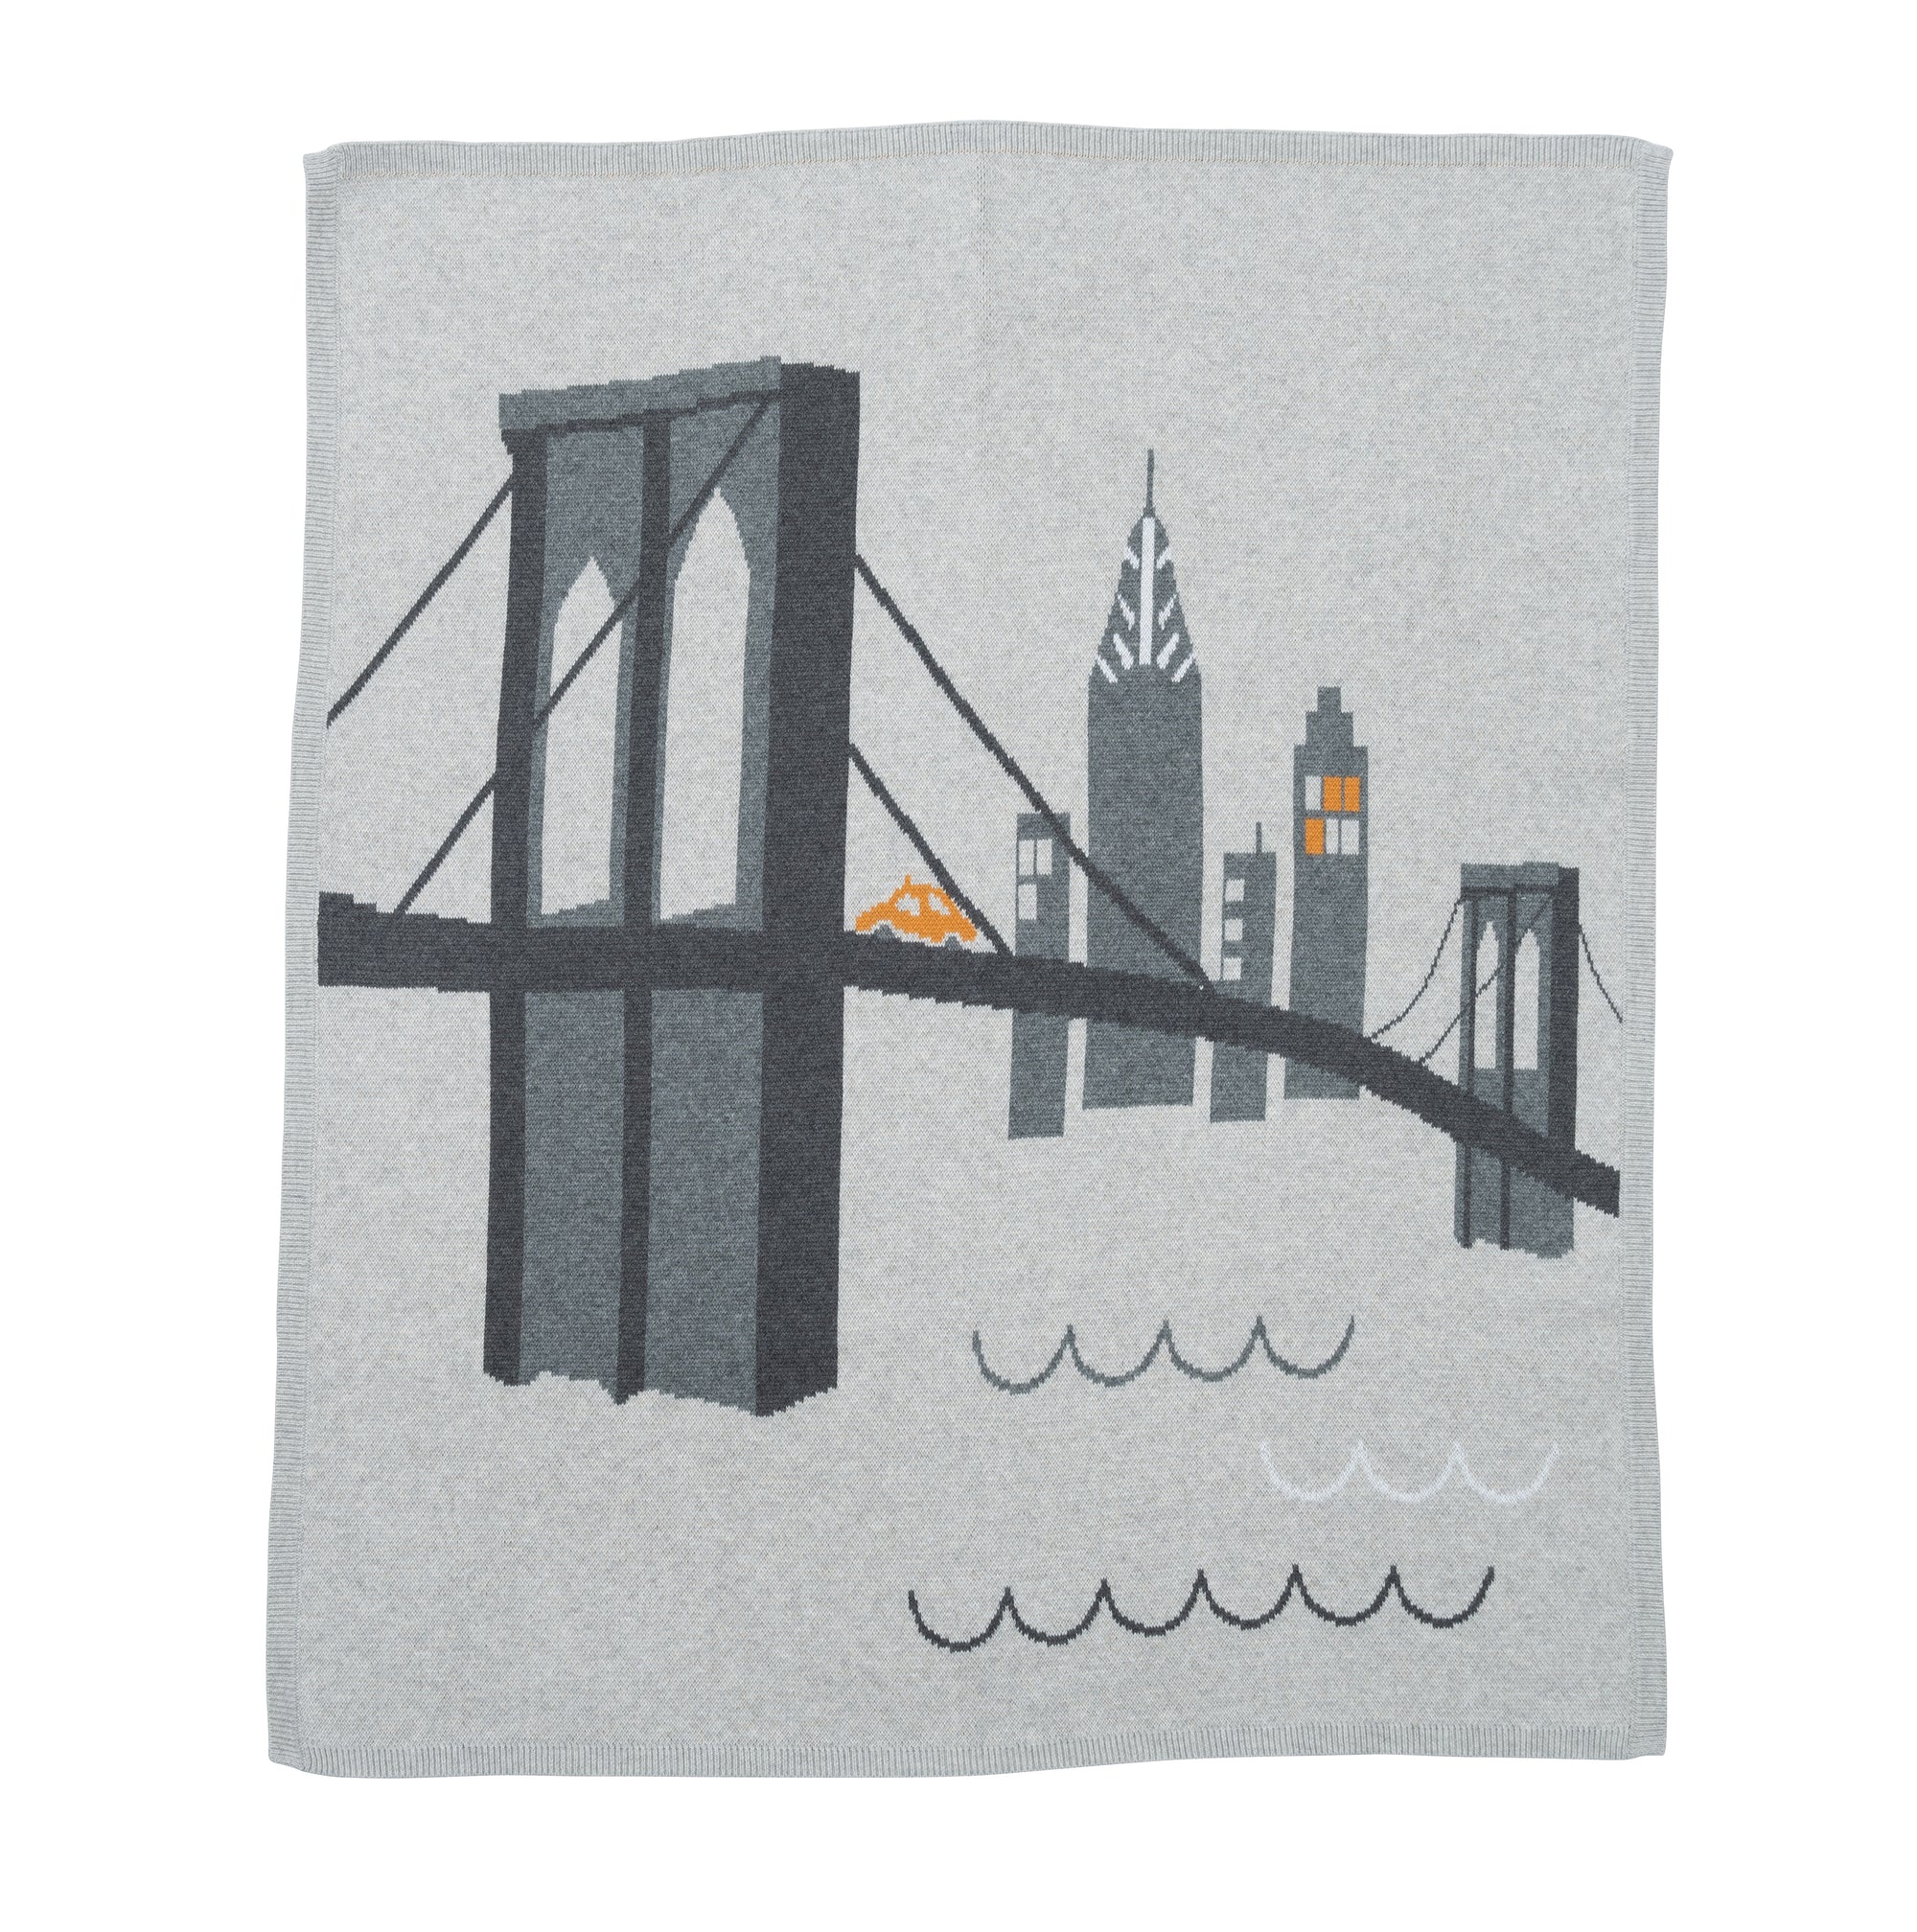 One of our favorite New York icons, the Brooklyn Bride gray stroller size blanket perfect for a traveling family by Lucky Jade Kids. brooklyn bridge blanket new york baby gear neutral grey baby blanket #luckyjadeinc #celebrationdress #holidaydress #babycoverall #kidjoggers #partydress #babyonesie #animalcoveral #chirstmasdress #littlegirloutfits #littlegirlstyle #toddlerstyle #toddleroutfits #kidsclothing #kidclothingcompany #kidboutique #babyboutique